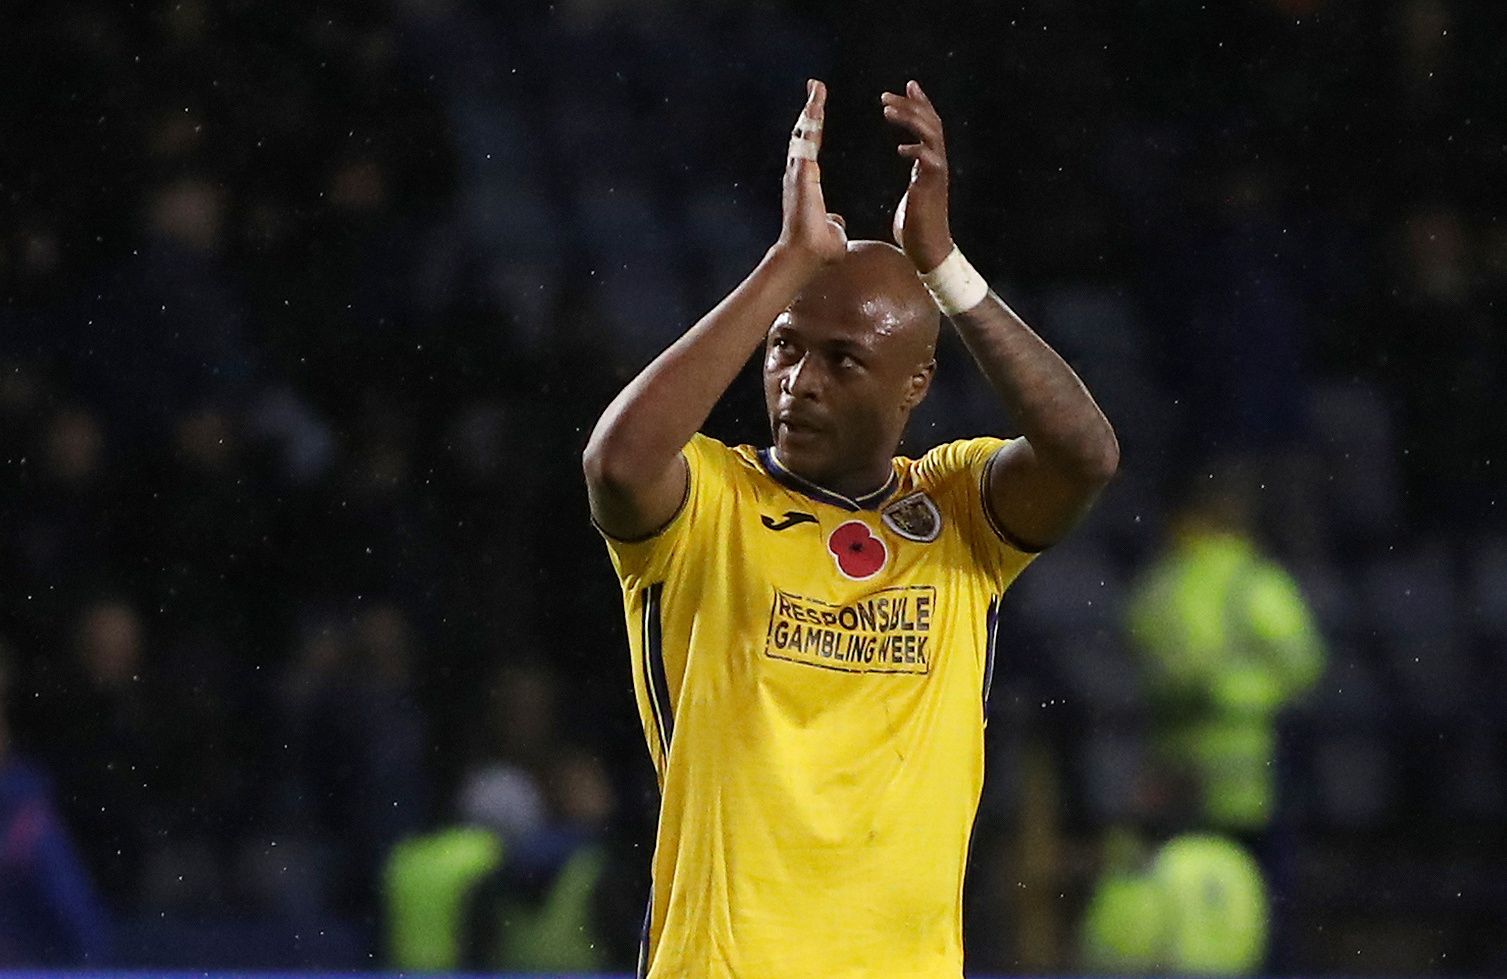 Soccer Football - Championship - Sheffield Wednesday v Swansea City - Hillsborough, Sheffield, Britain - November 9, 2019   Swansea City's Andre Ayew applauds fans after the match   Action Images/Molly Darlington    EDITORIAL USE ONLY. No use with unauthorized audio, video, data, fixture lists, club/league logos or 